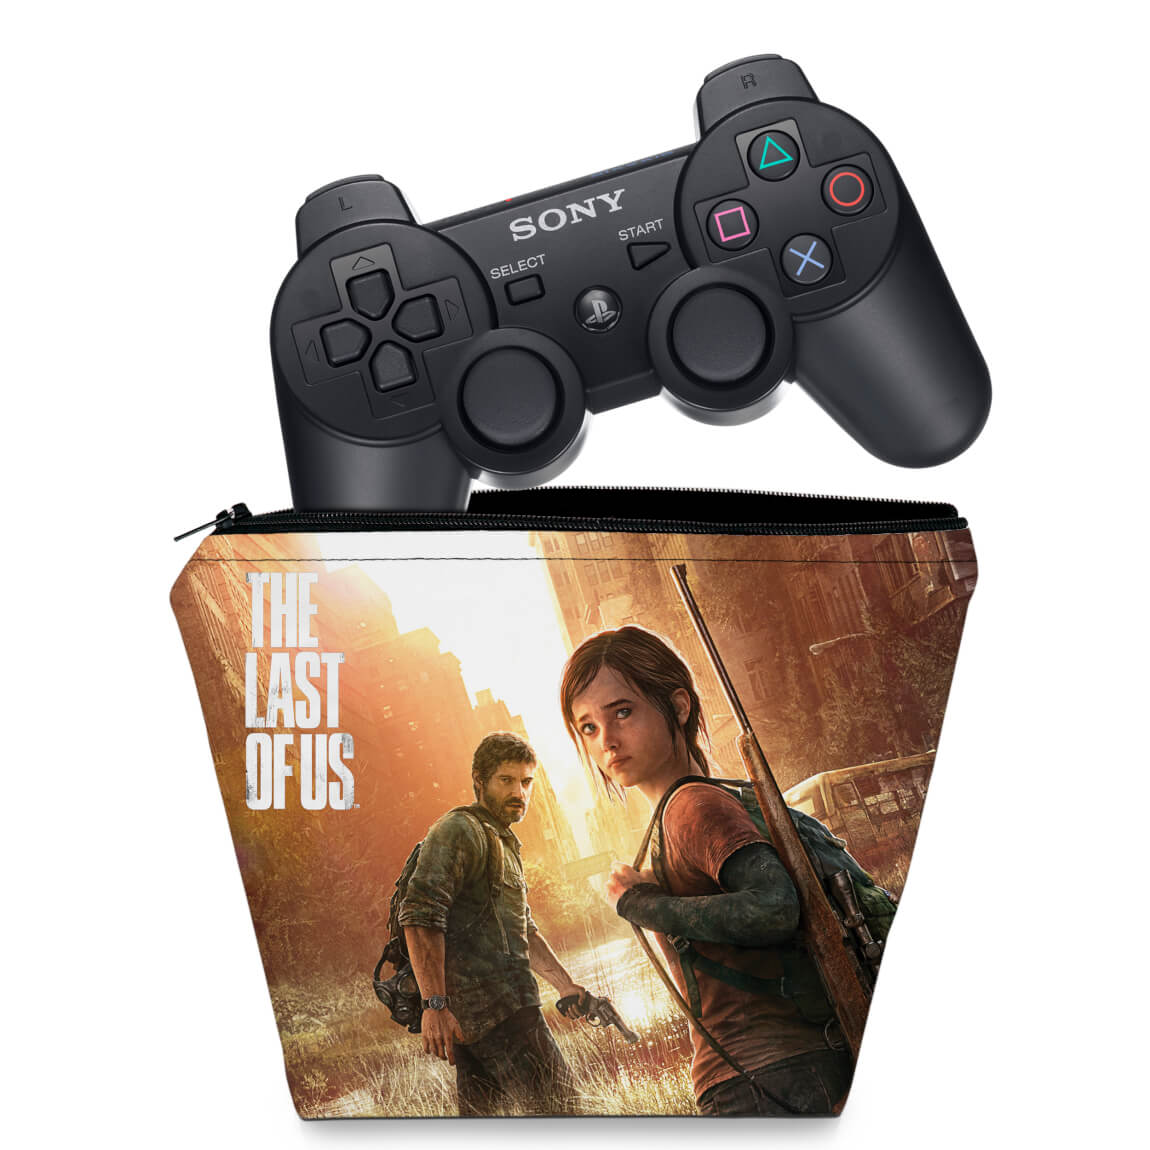 The Last of Us PS3 Sony Playstation 3